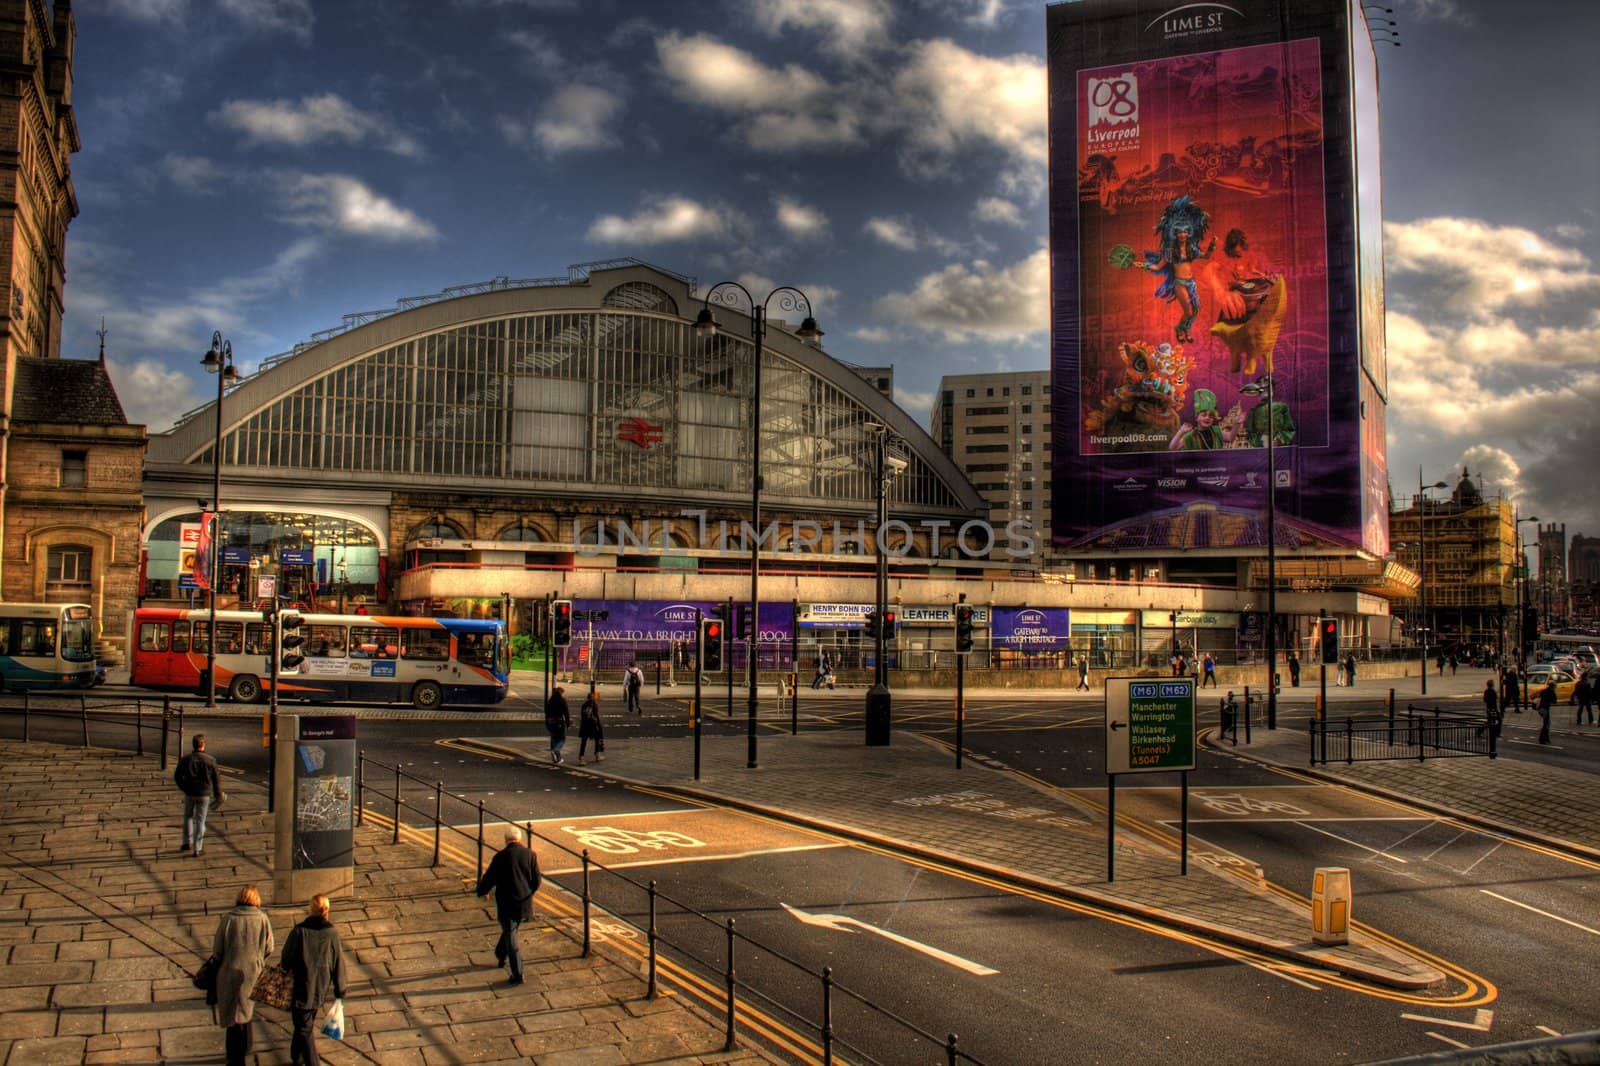 HDR image of Lime Street Station, Liverpool, UK by illu